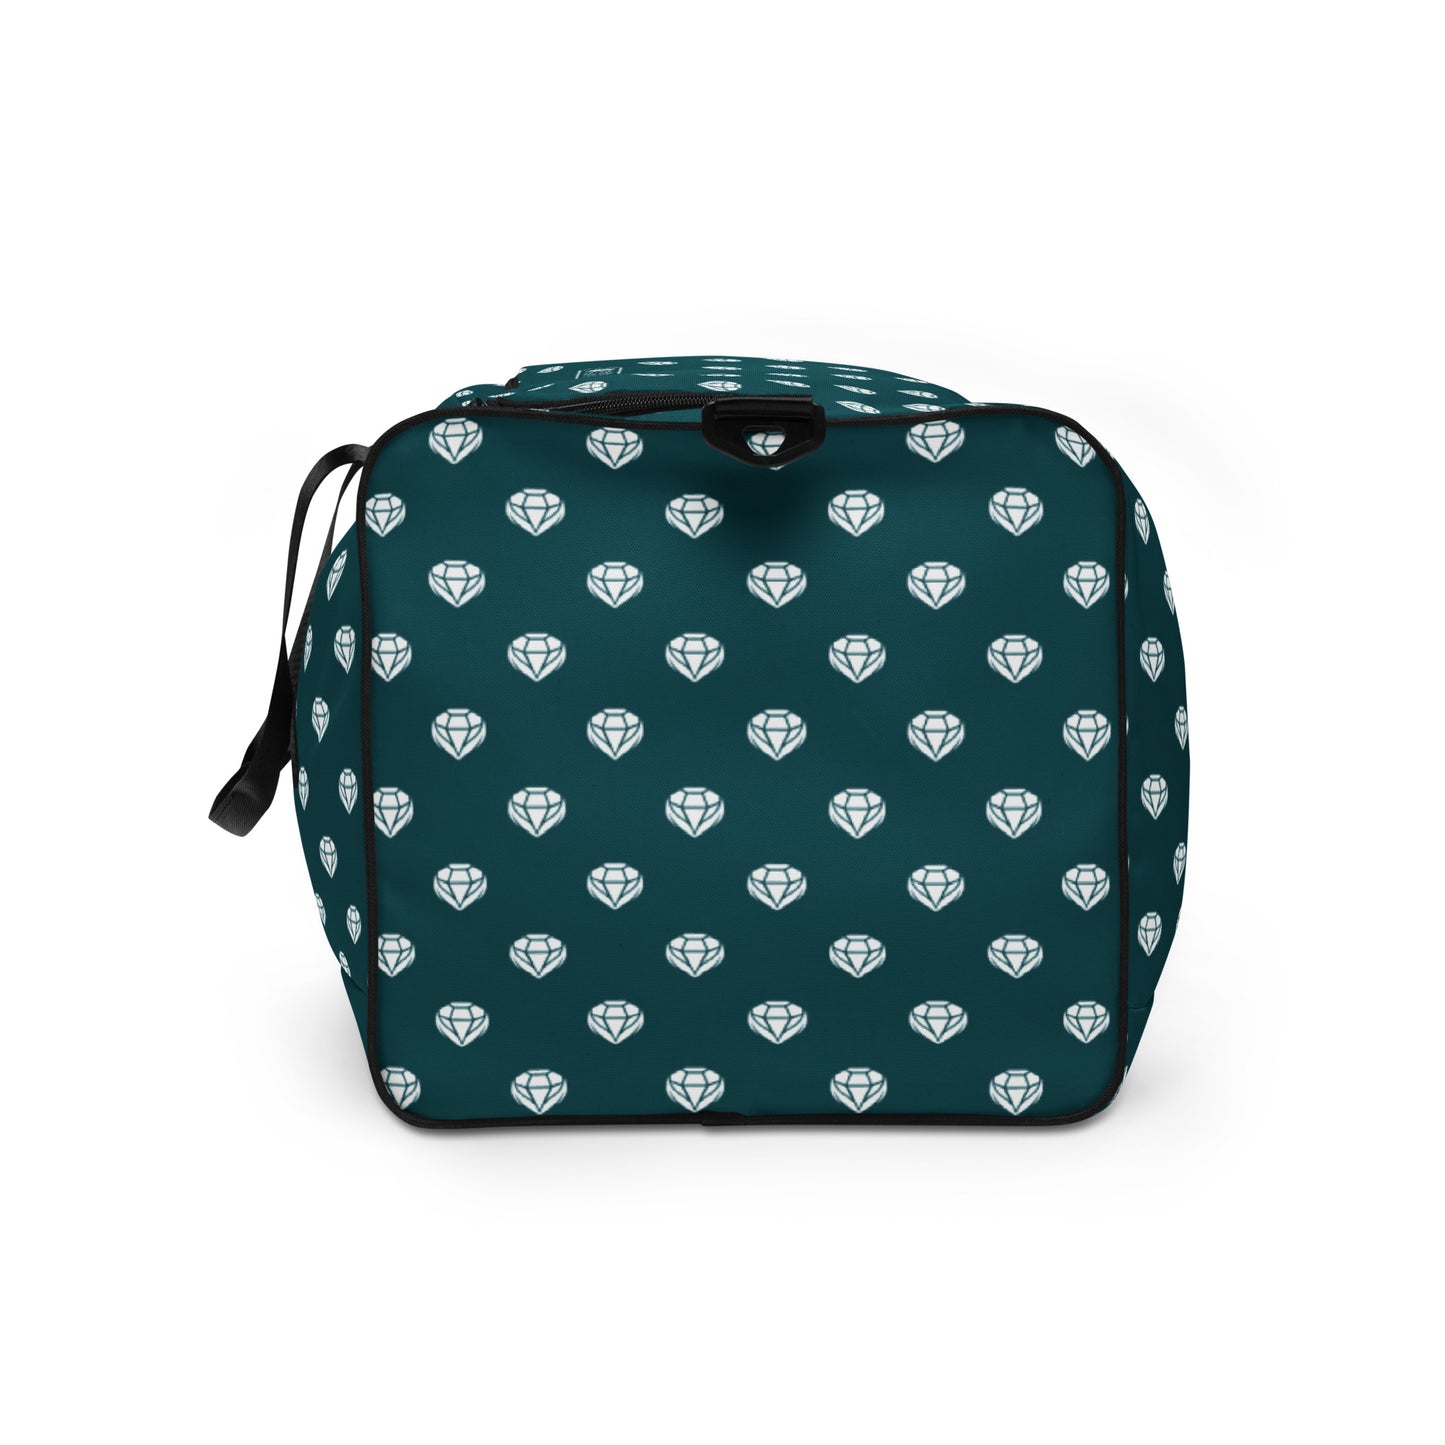 Duffle bag with Emerald Pattern